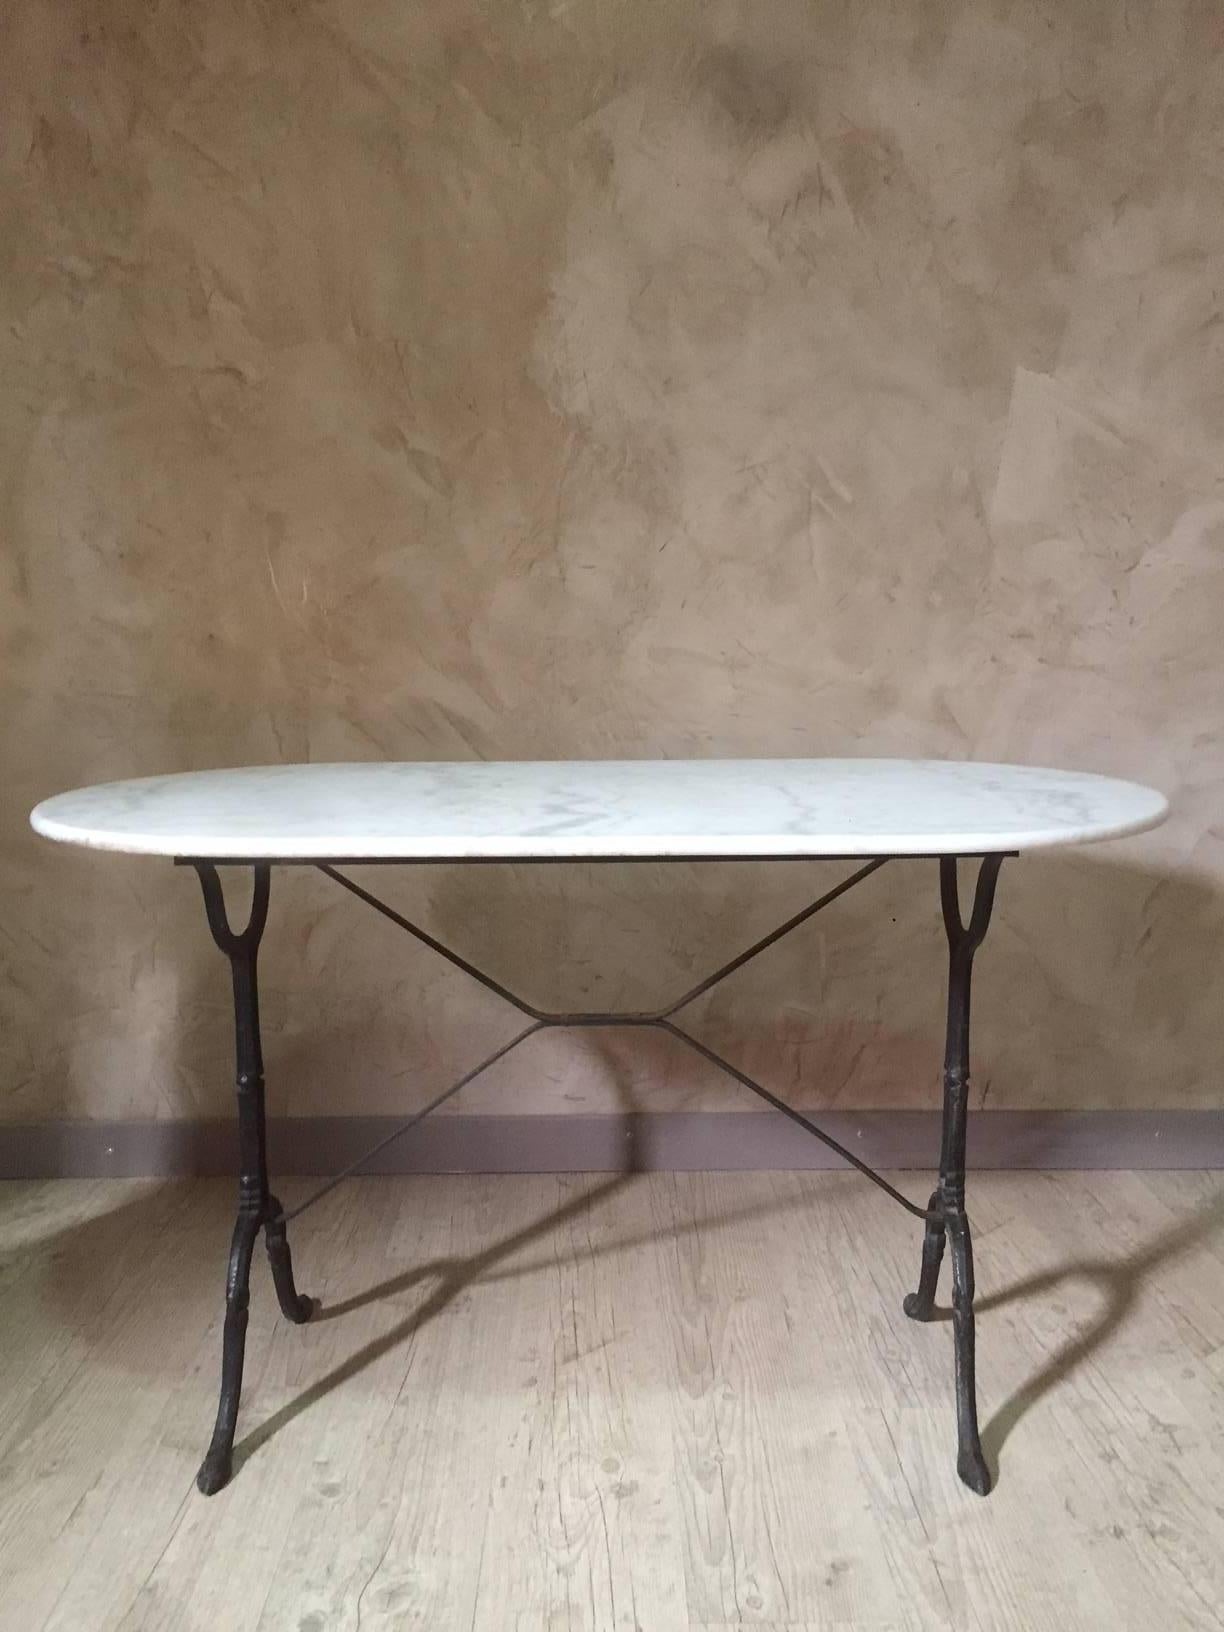 Very nice French Bistro table with white marble from the 1940s. The base is made with metal.
If you go to Paris you will see these Bistro tables in every Parisienne Brasserie.